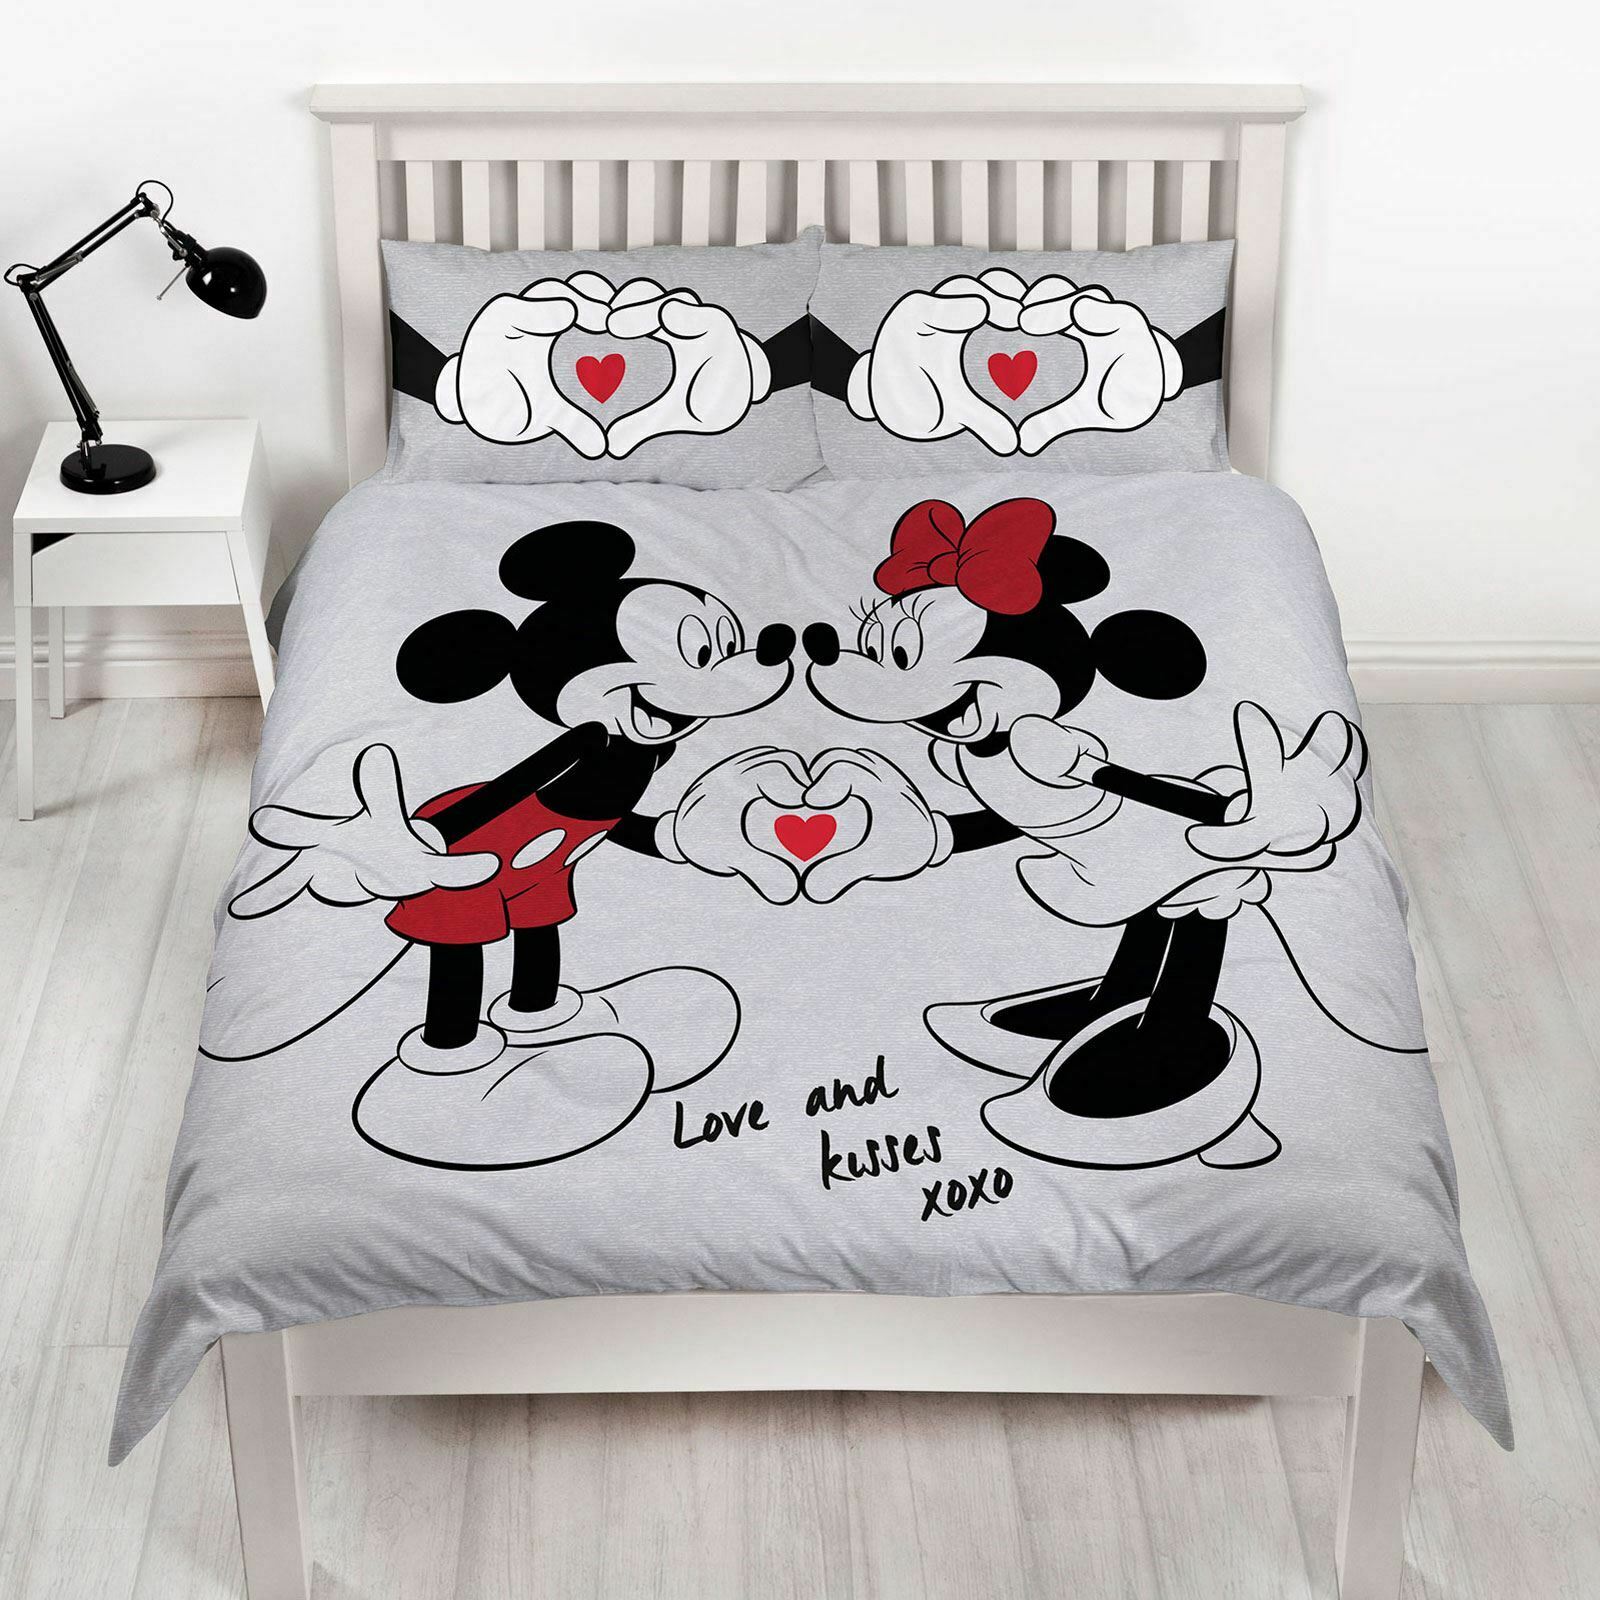 Disney Mickey And Minnie Mouse Quilt Cover Set Double Love And